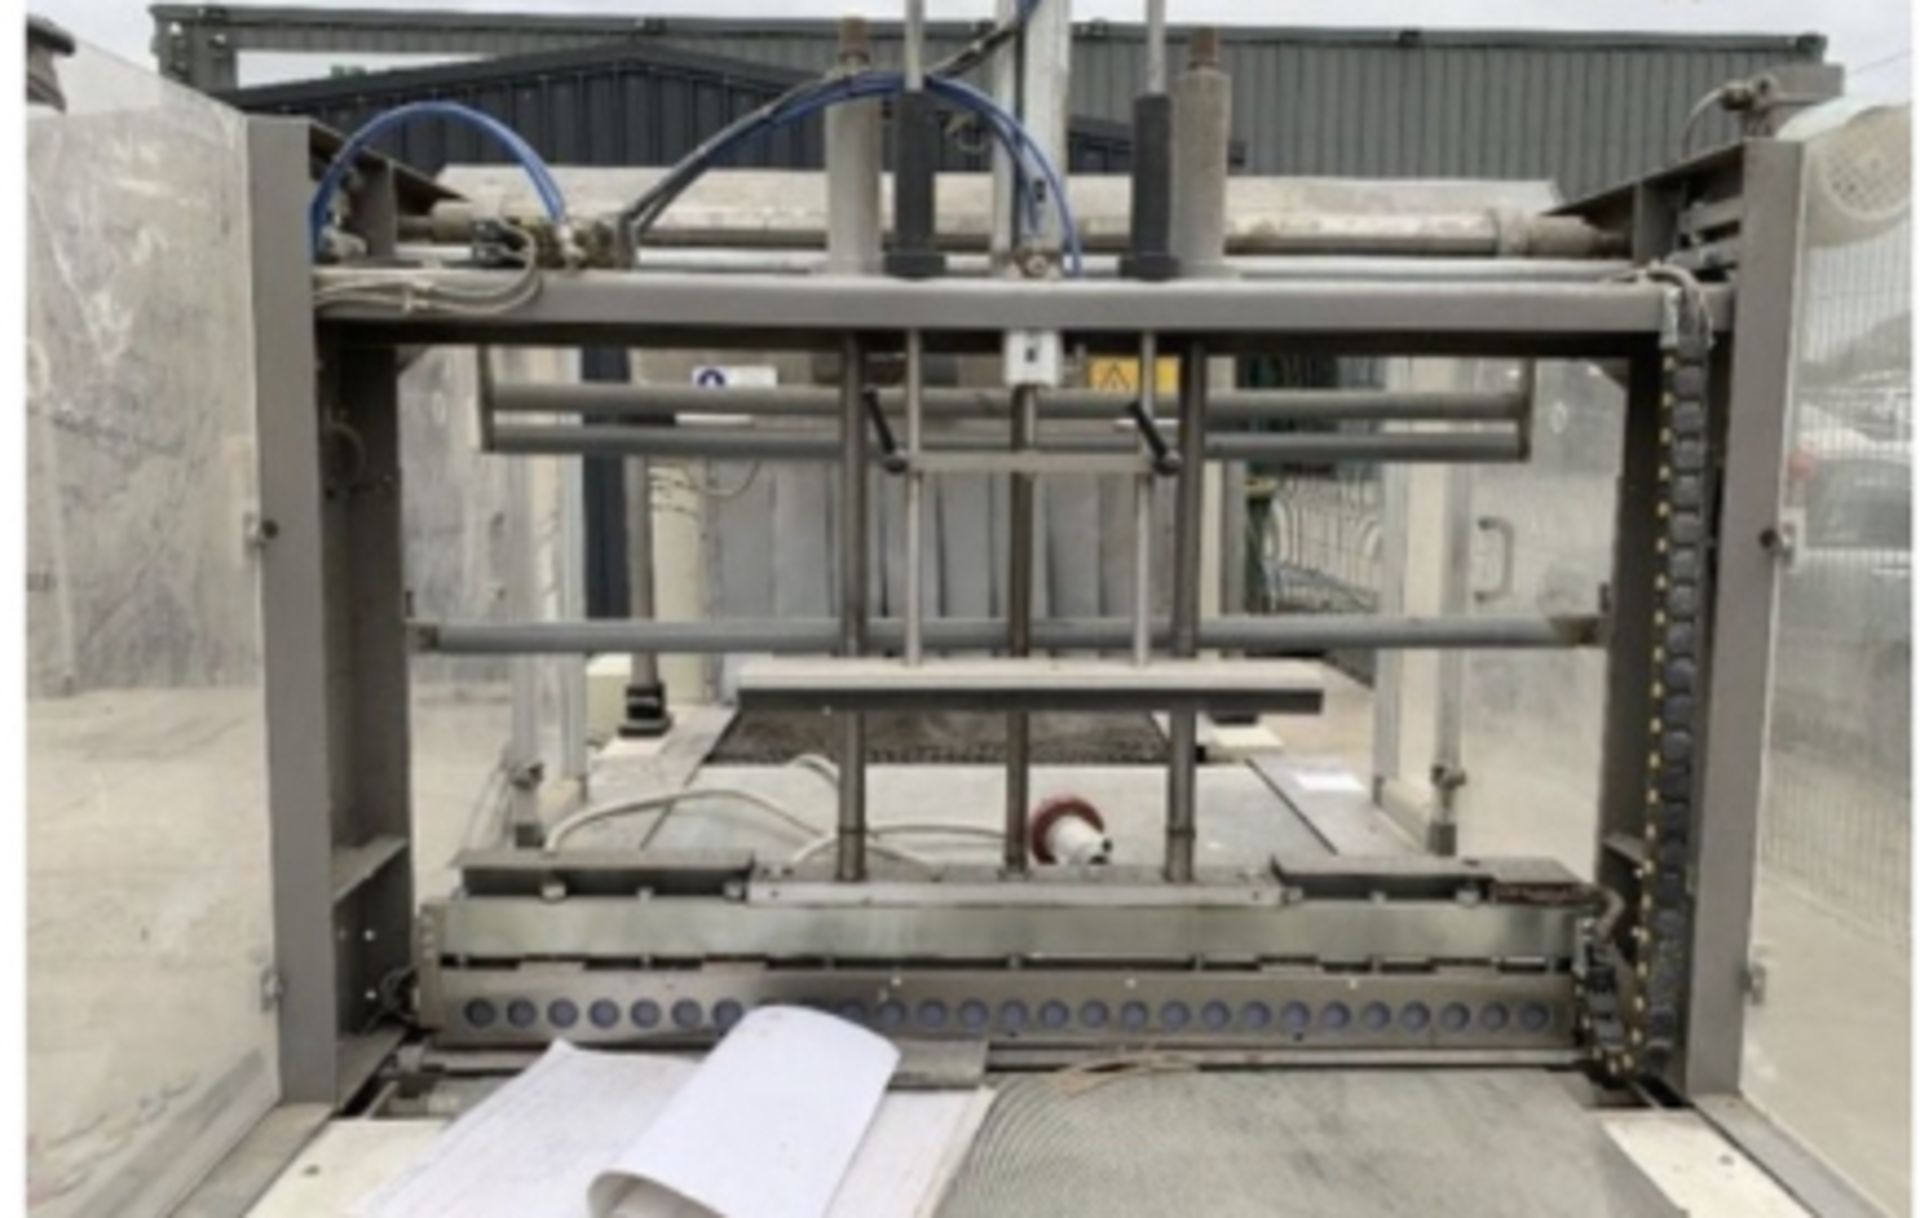 ADPAK COMPACT PSI 3 PHASE SHRINK WRAP SYSTEM .LOCATION NORTHERN IRELAND. - Image 4 of 5